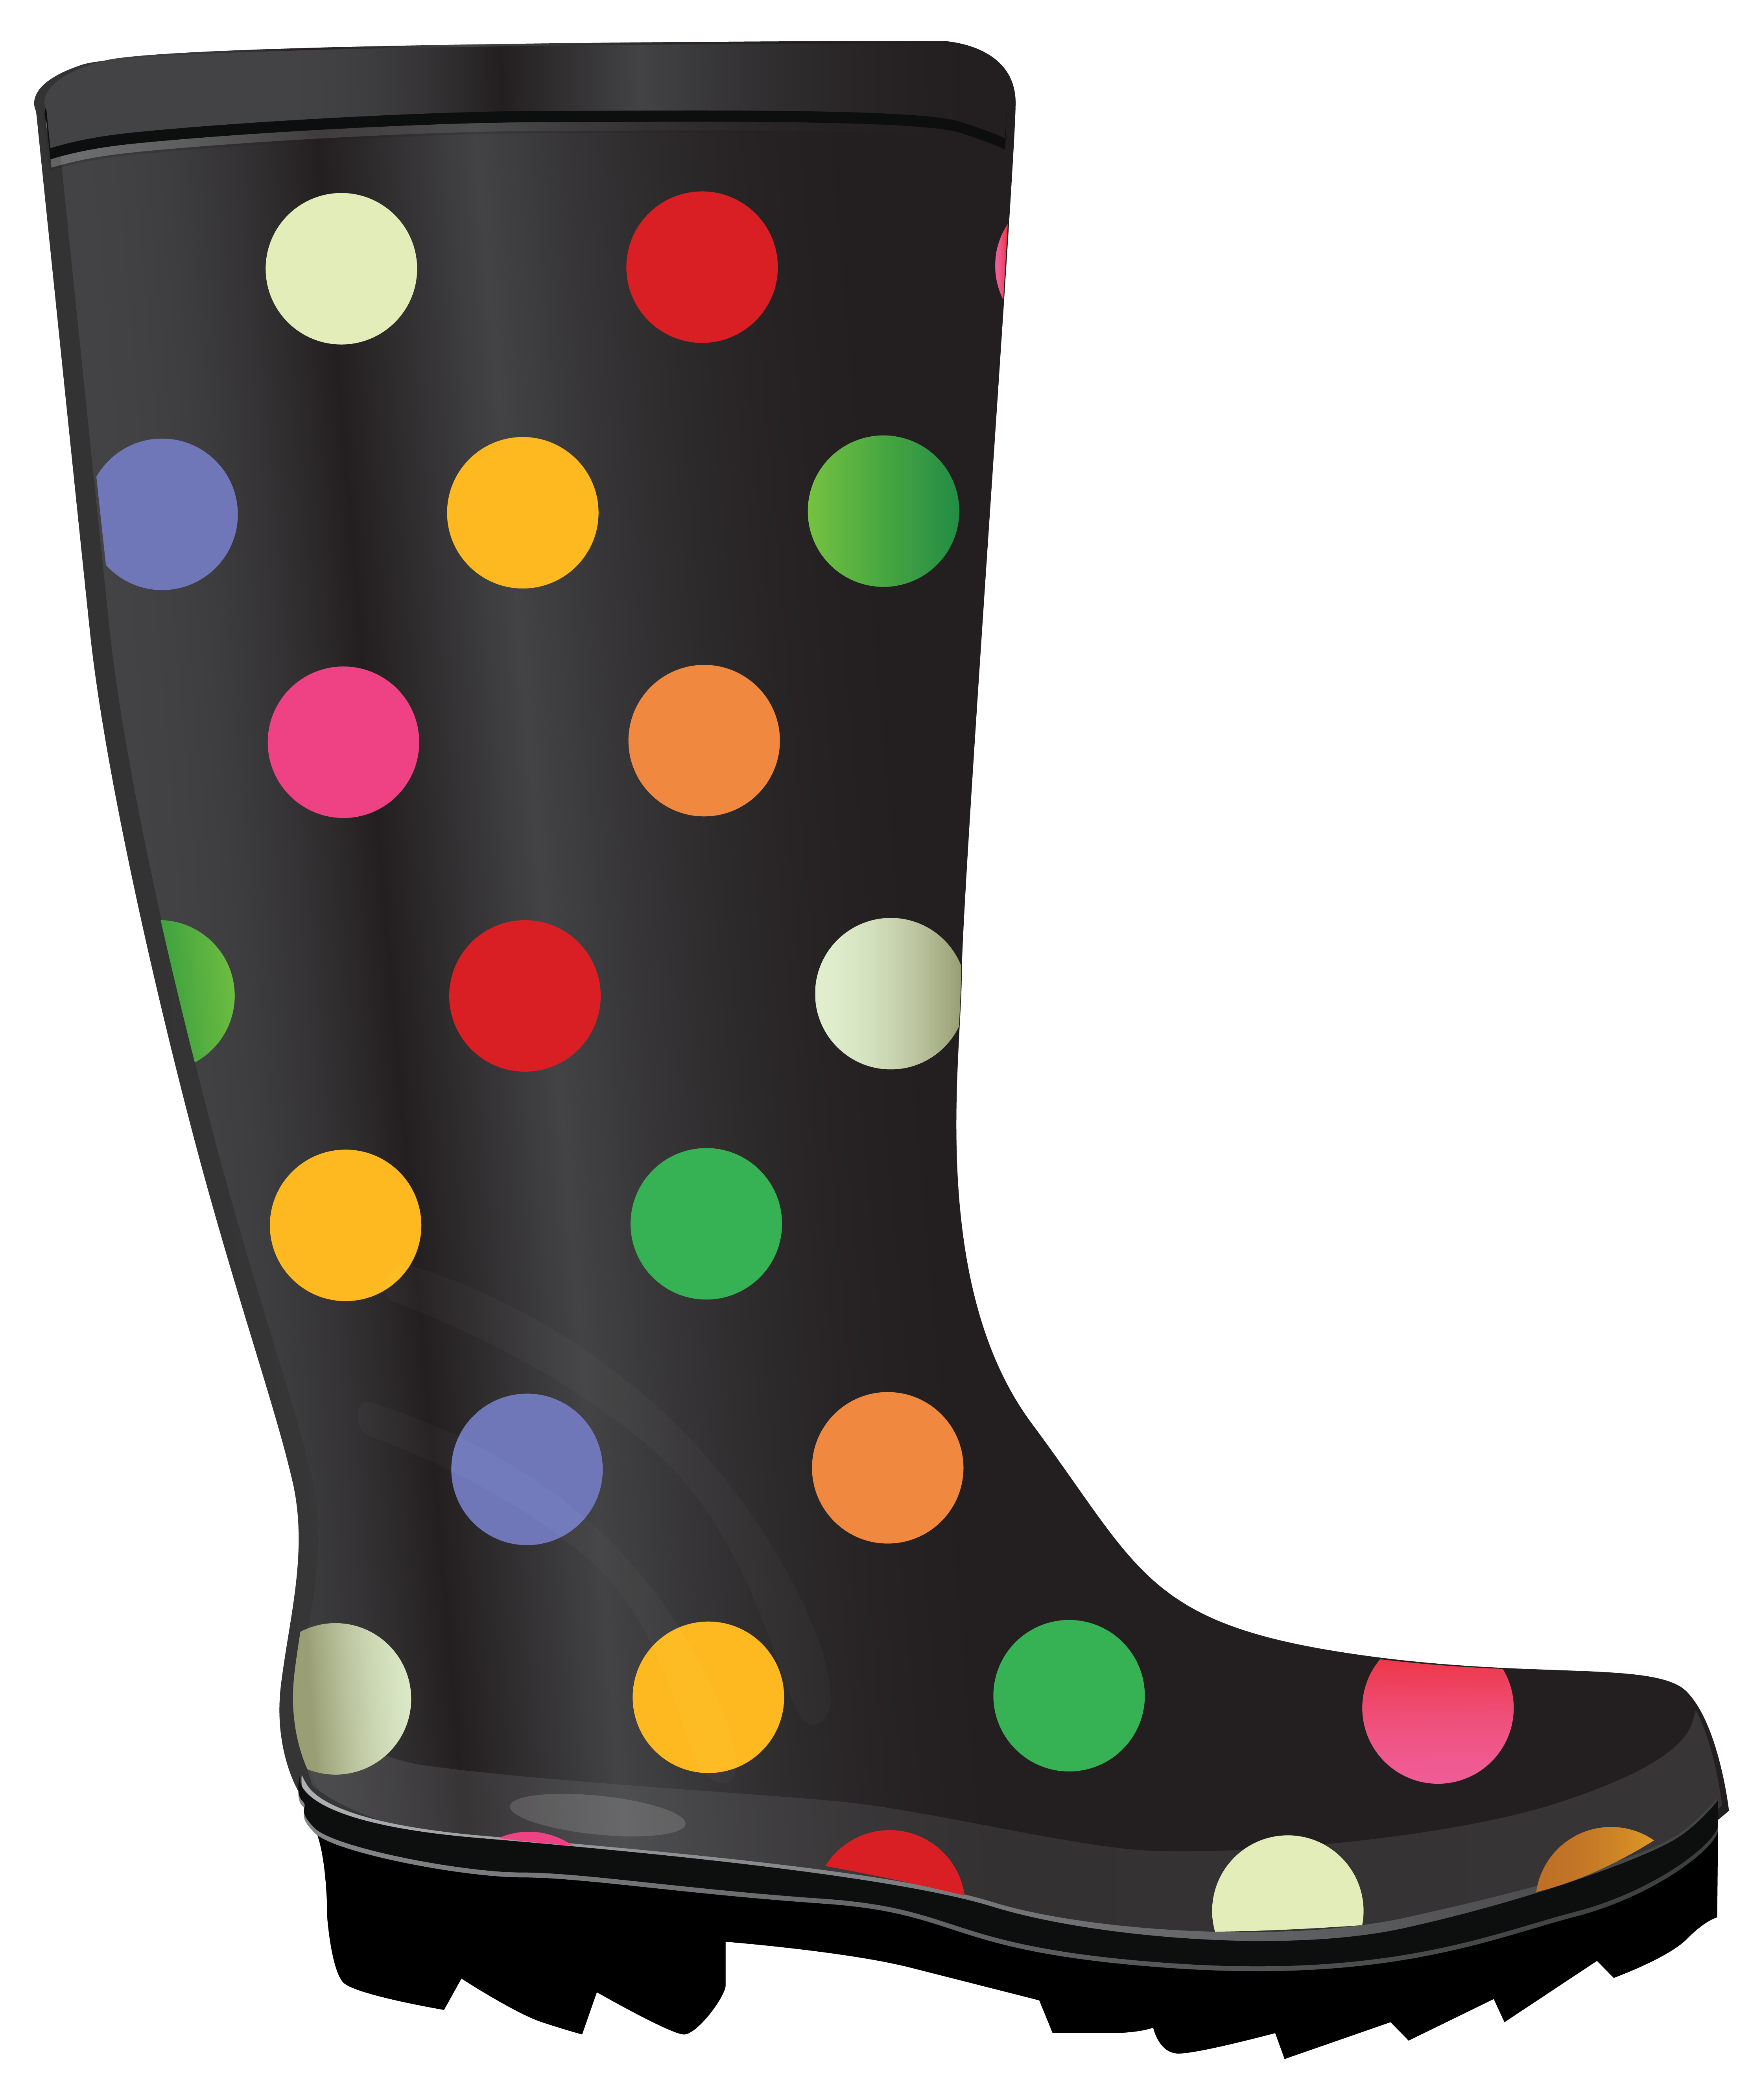 Rubber Boots PNG HD - 121439